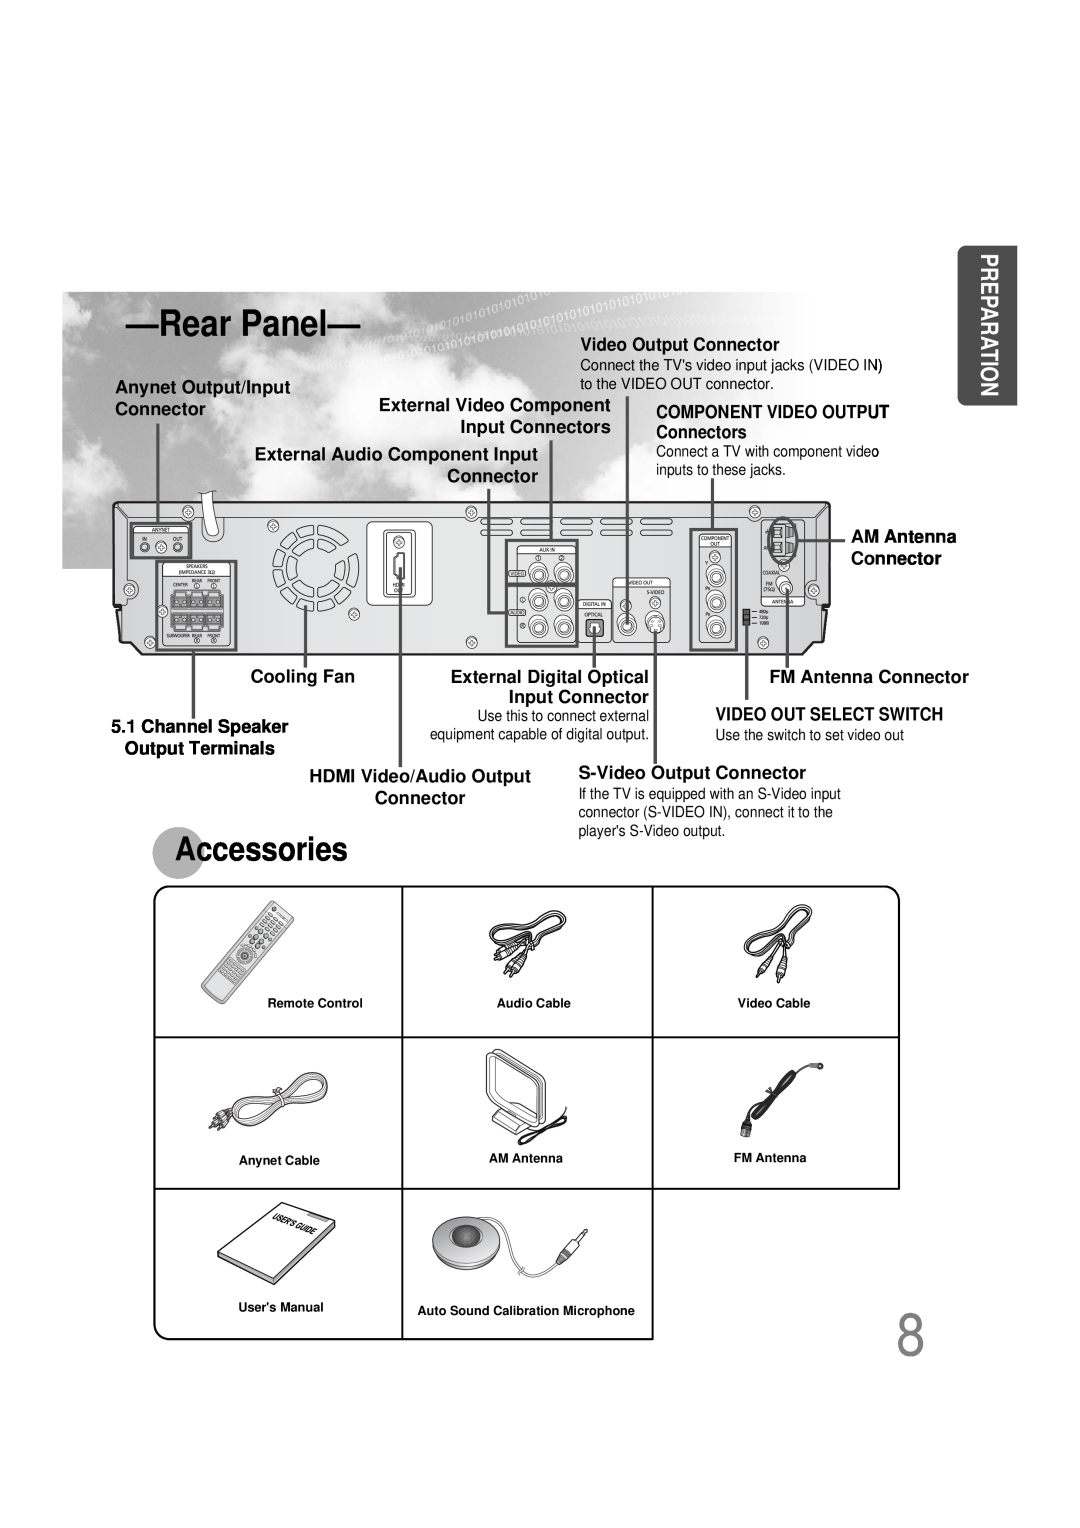 Samsung HT-DS665T, 20051111115925328, AH68-01493X instruction manual Rear Panel, Accessories, Preparation 